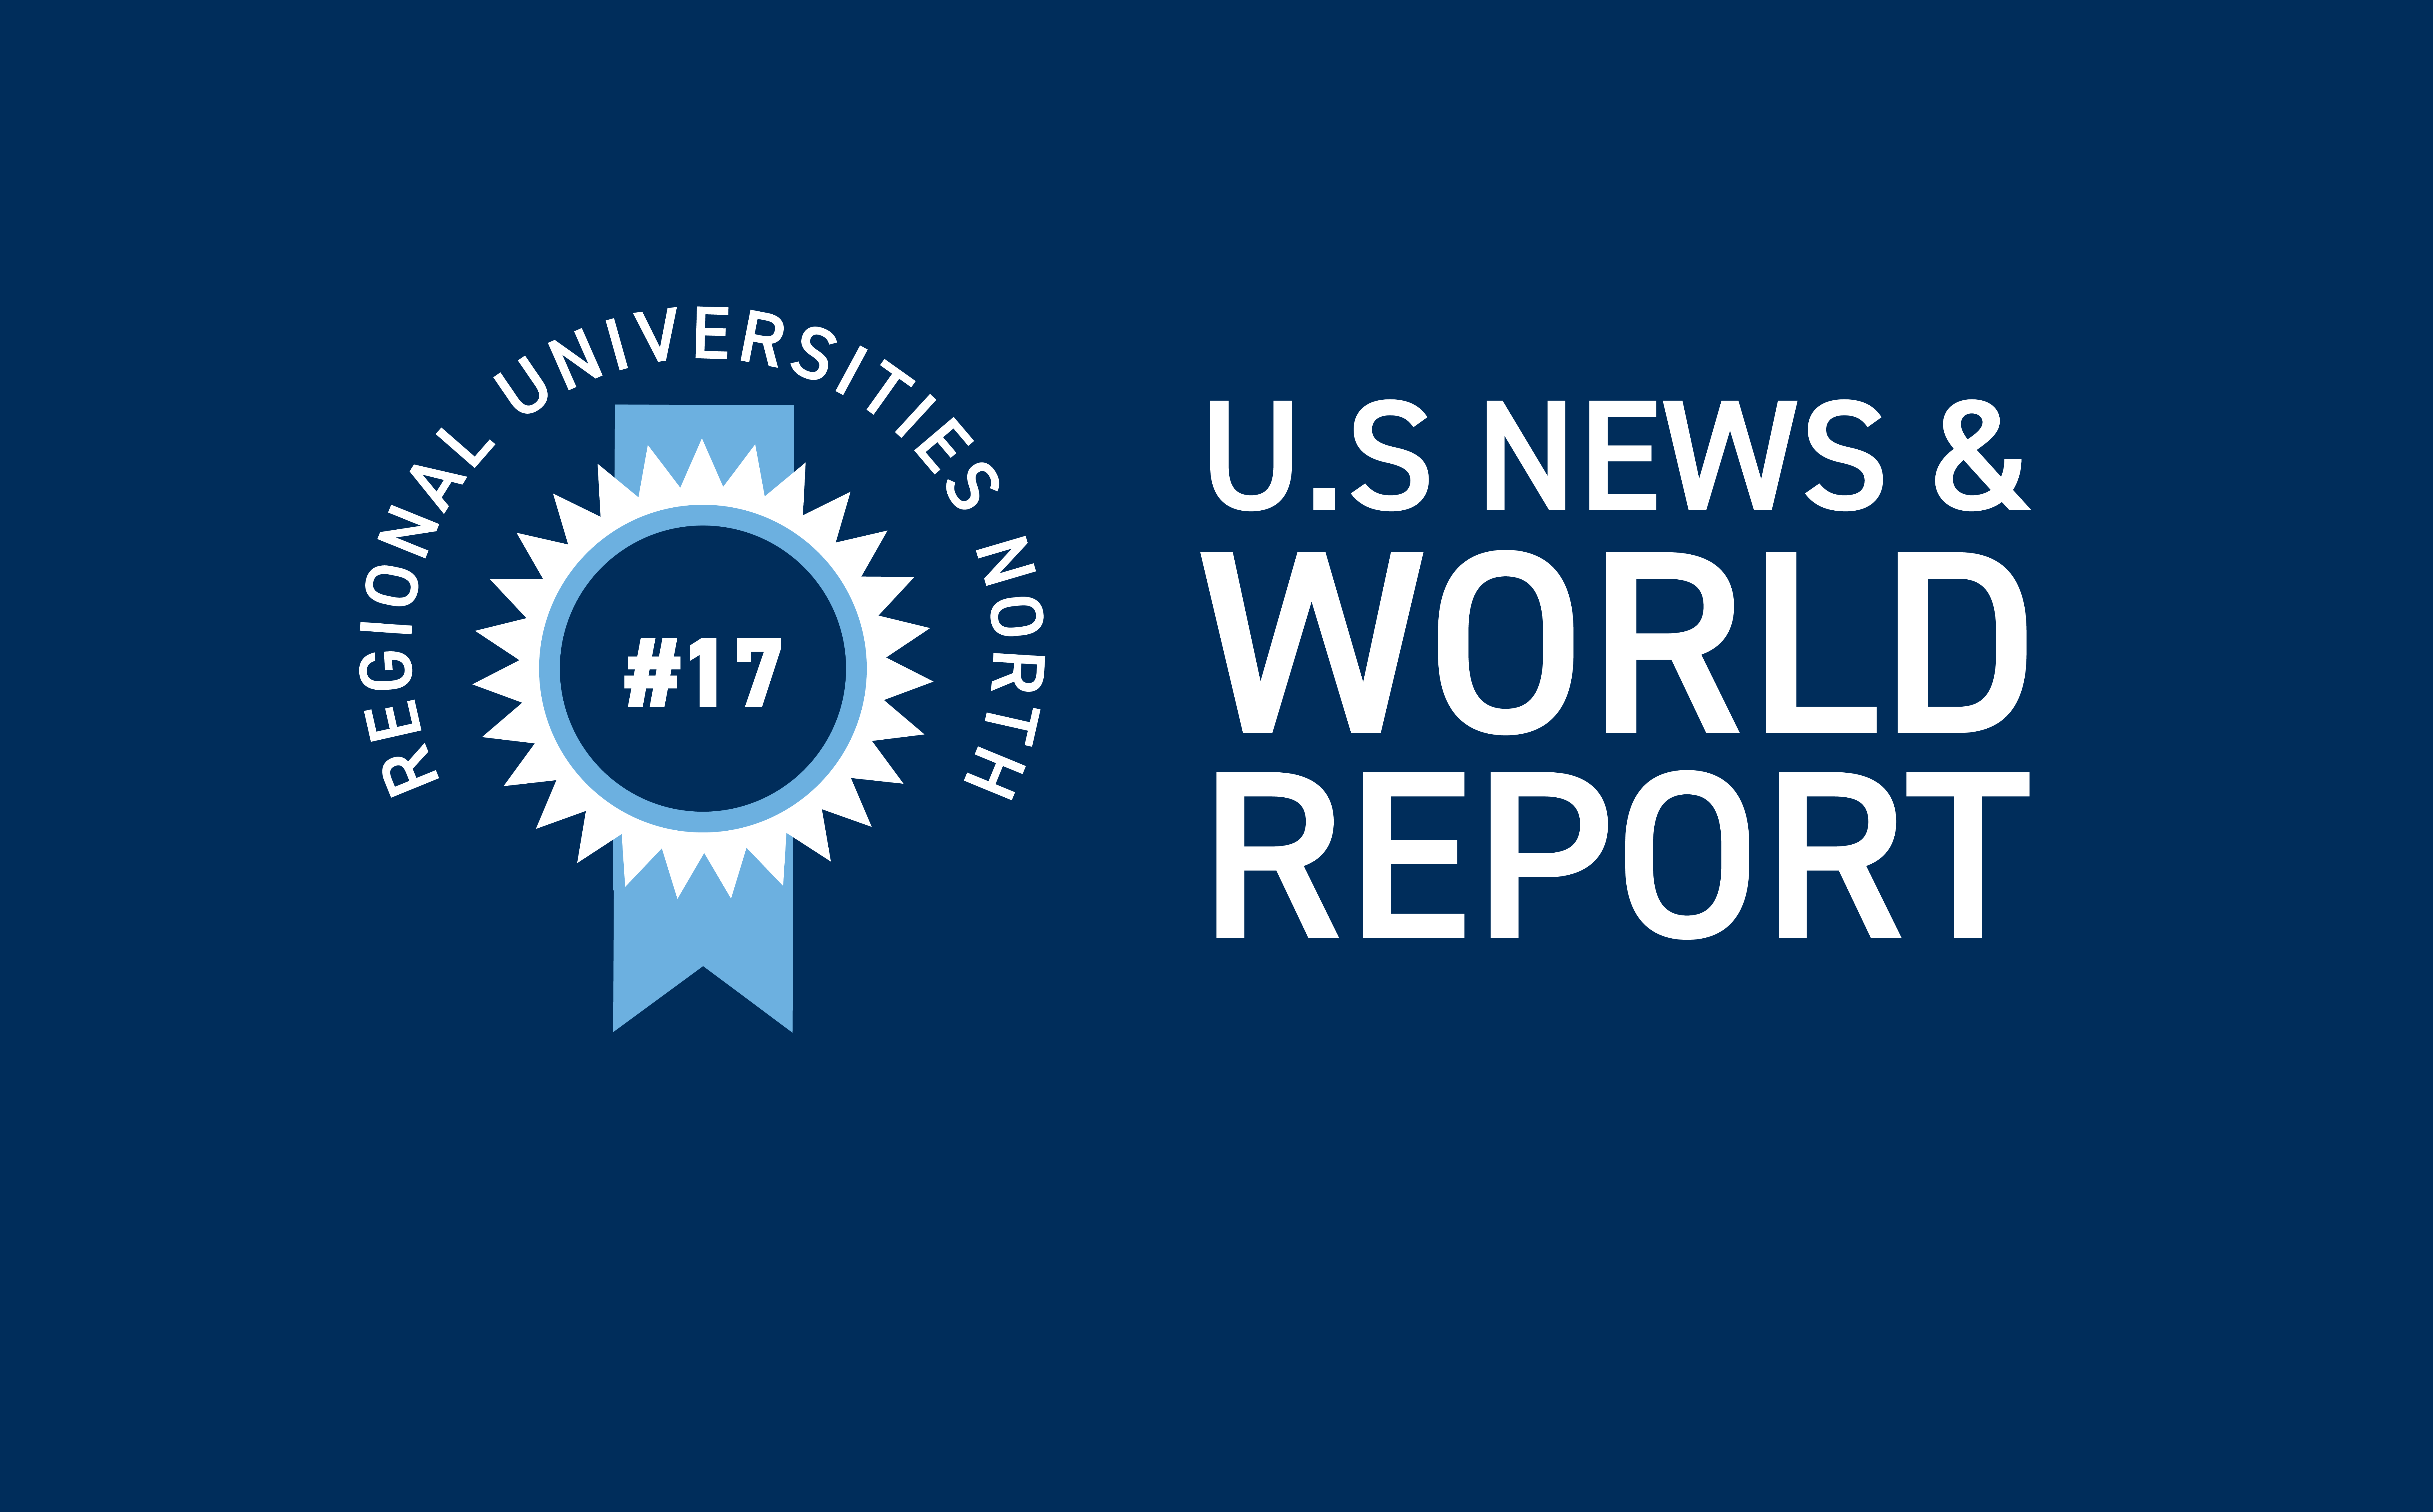 Graphic treatment noting new #17 ranking on US News & World Report